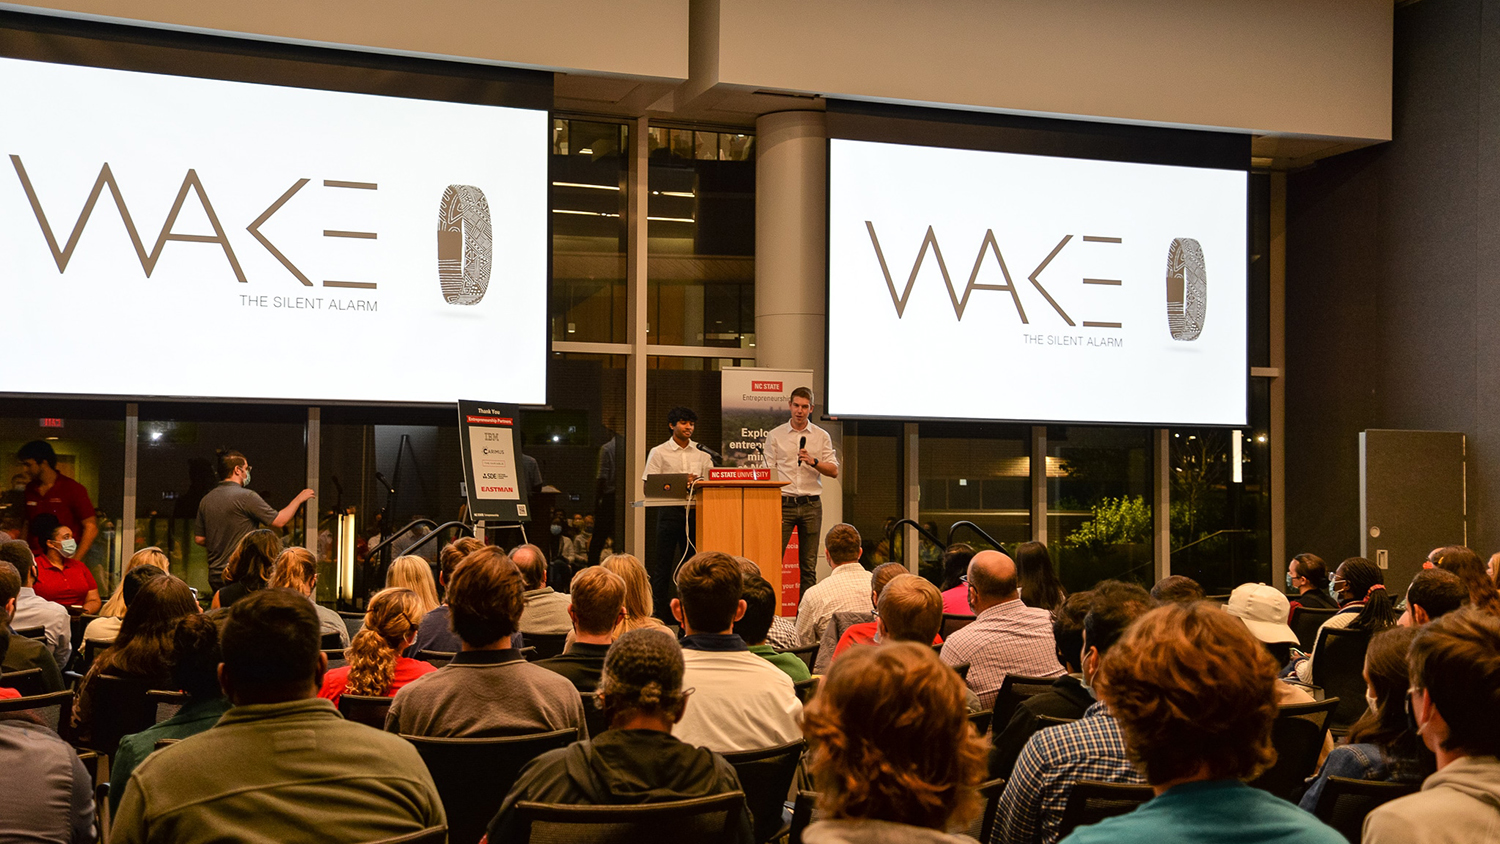 Adarsh Arun and Noah Gassner pitching their venture idea, Wake, at Wolf Den. Wake is a vibrating wristband that only wakes up the one wearing it.